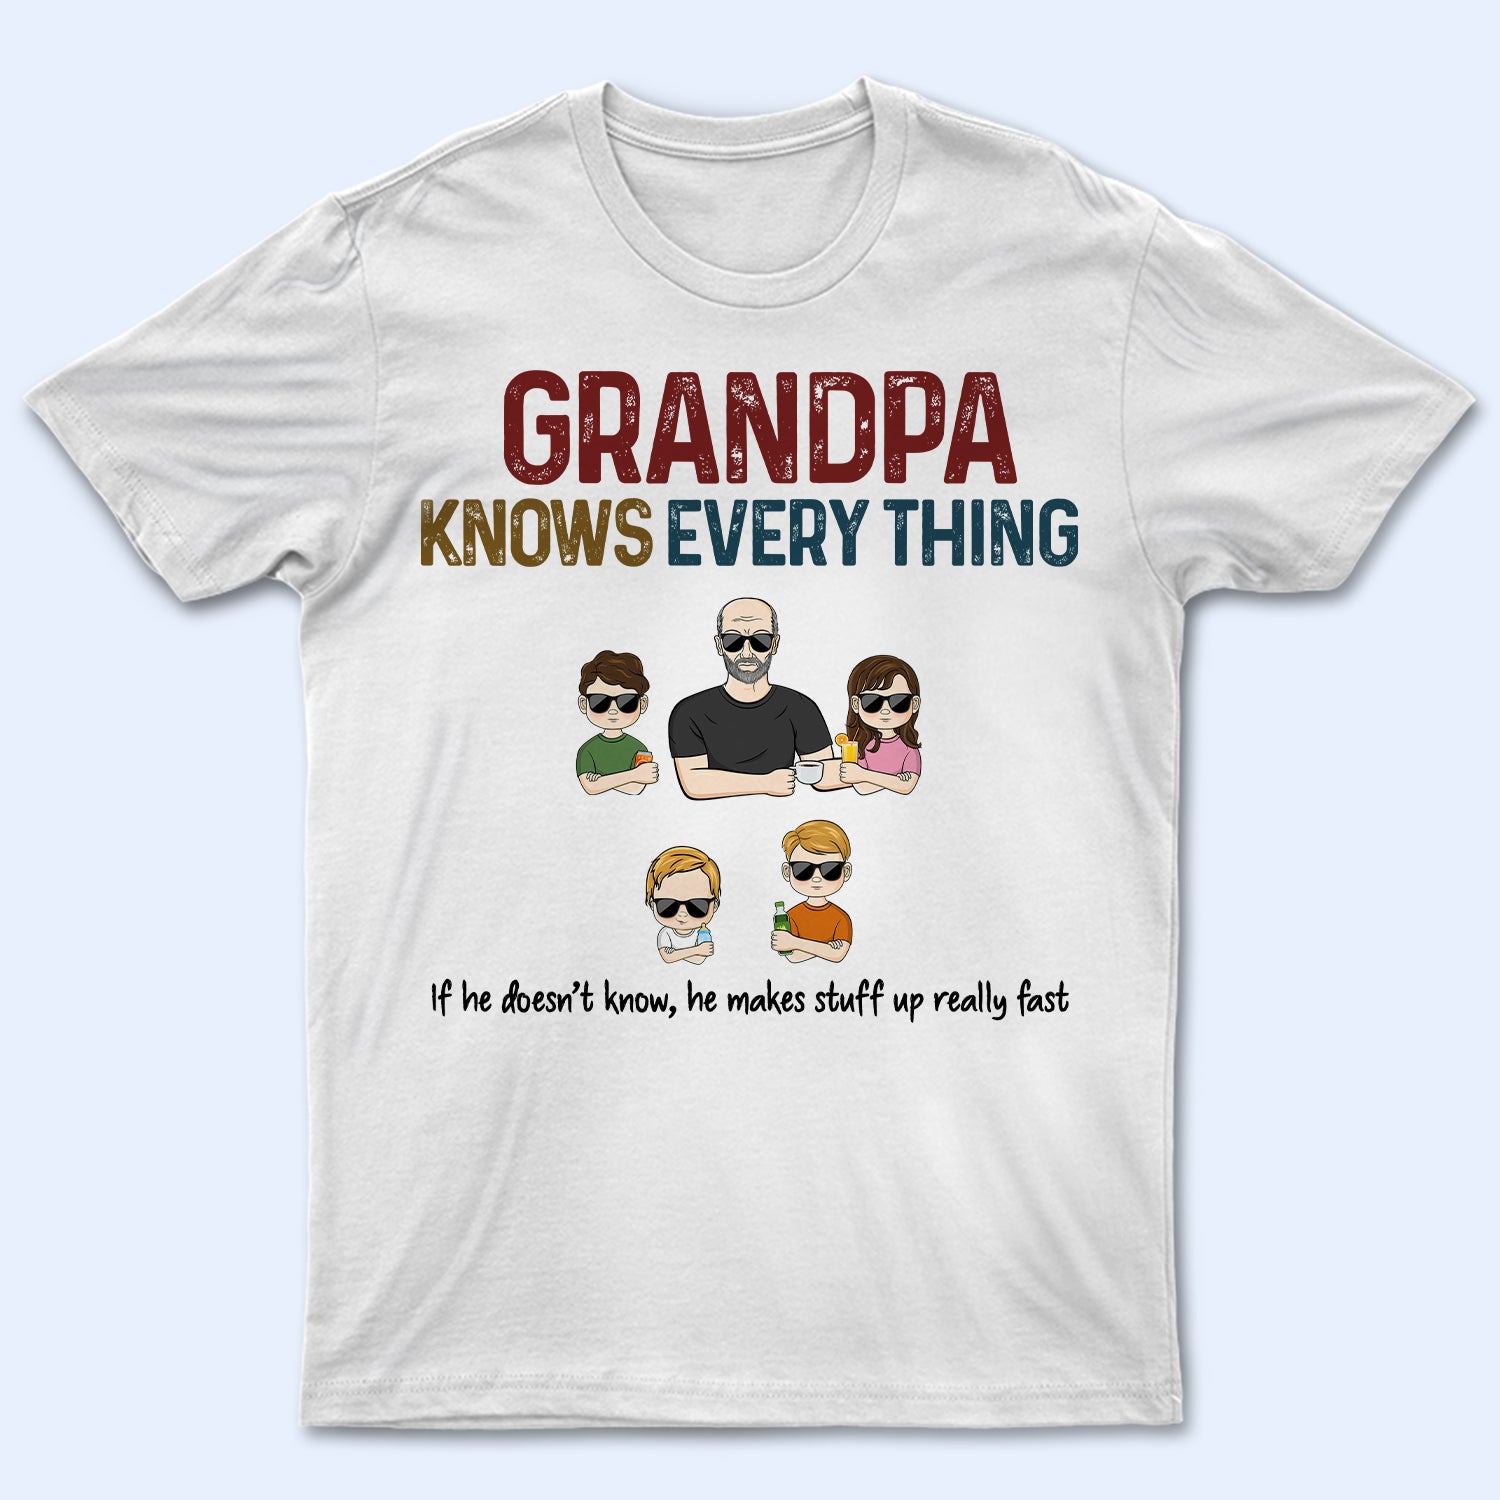 Grandpa Know Everything If He Doesn't - Gift For Father, Parents, Family, Grandparent, Grandfather - Personalized Custom T Shirt